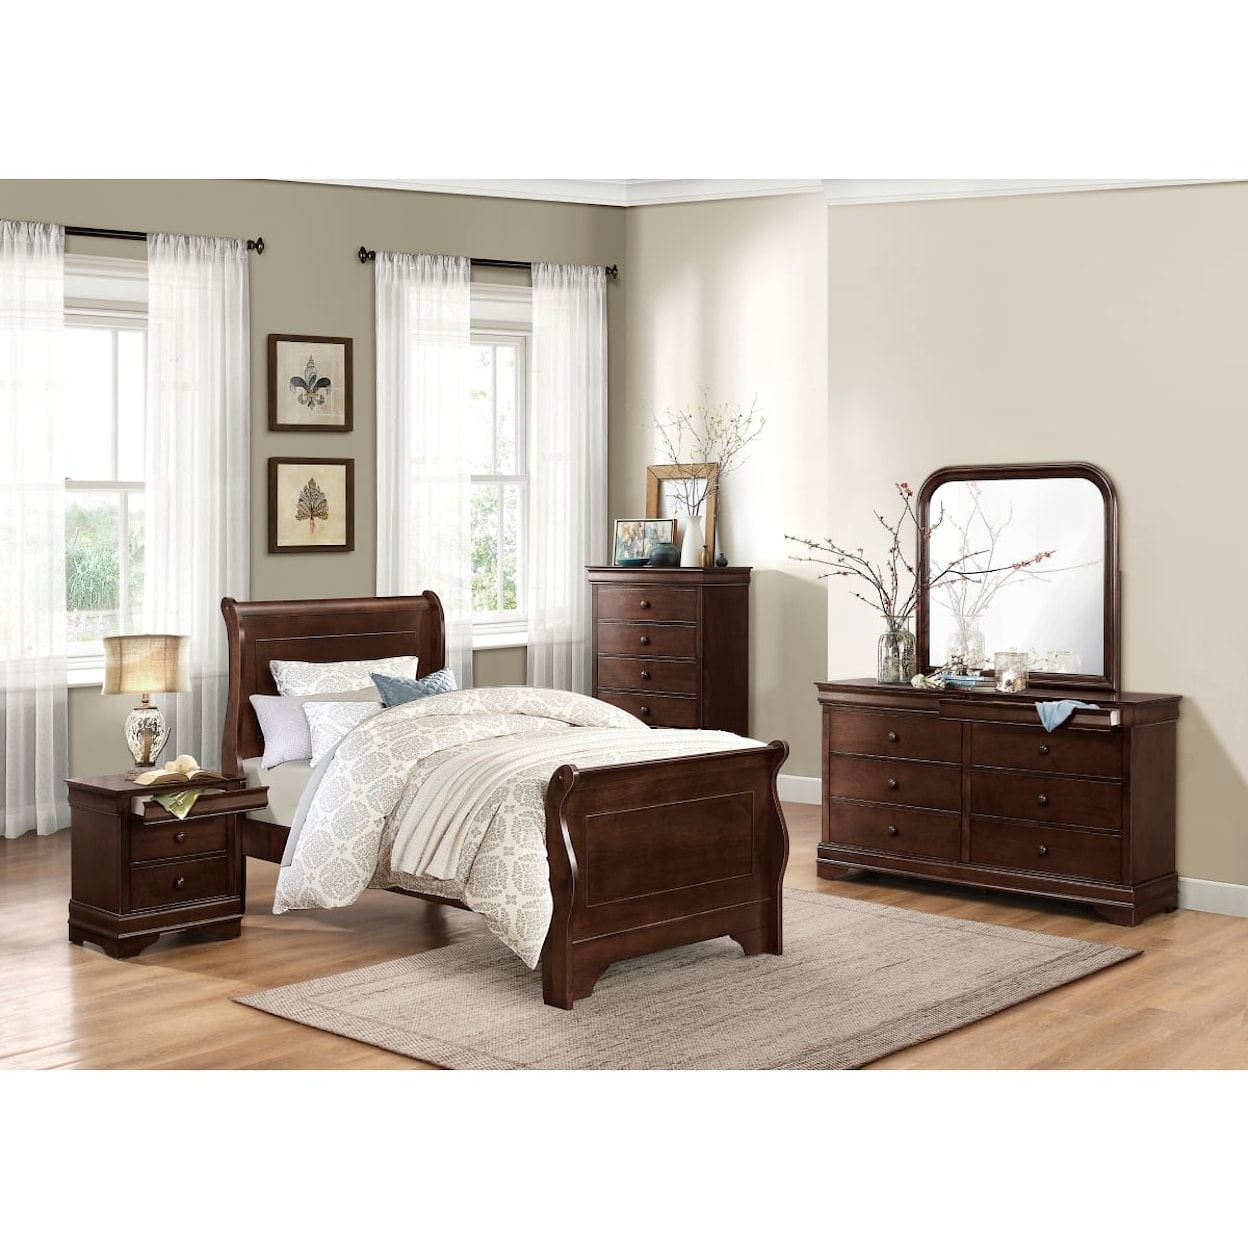 Homelegance Abbeville Twin Bed